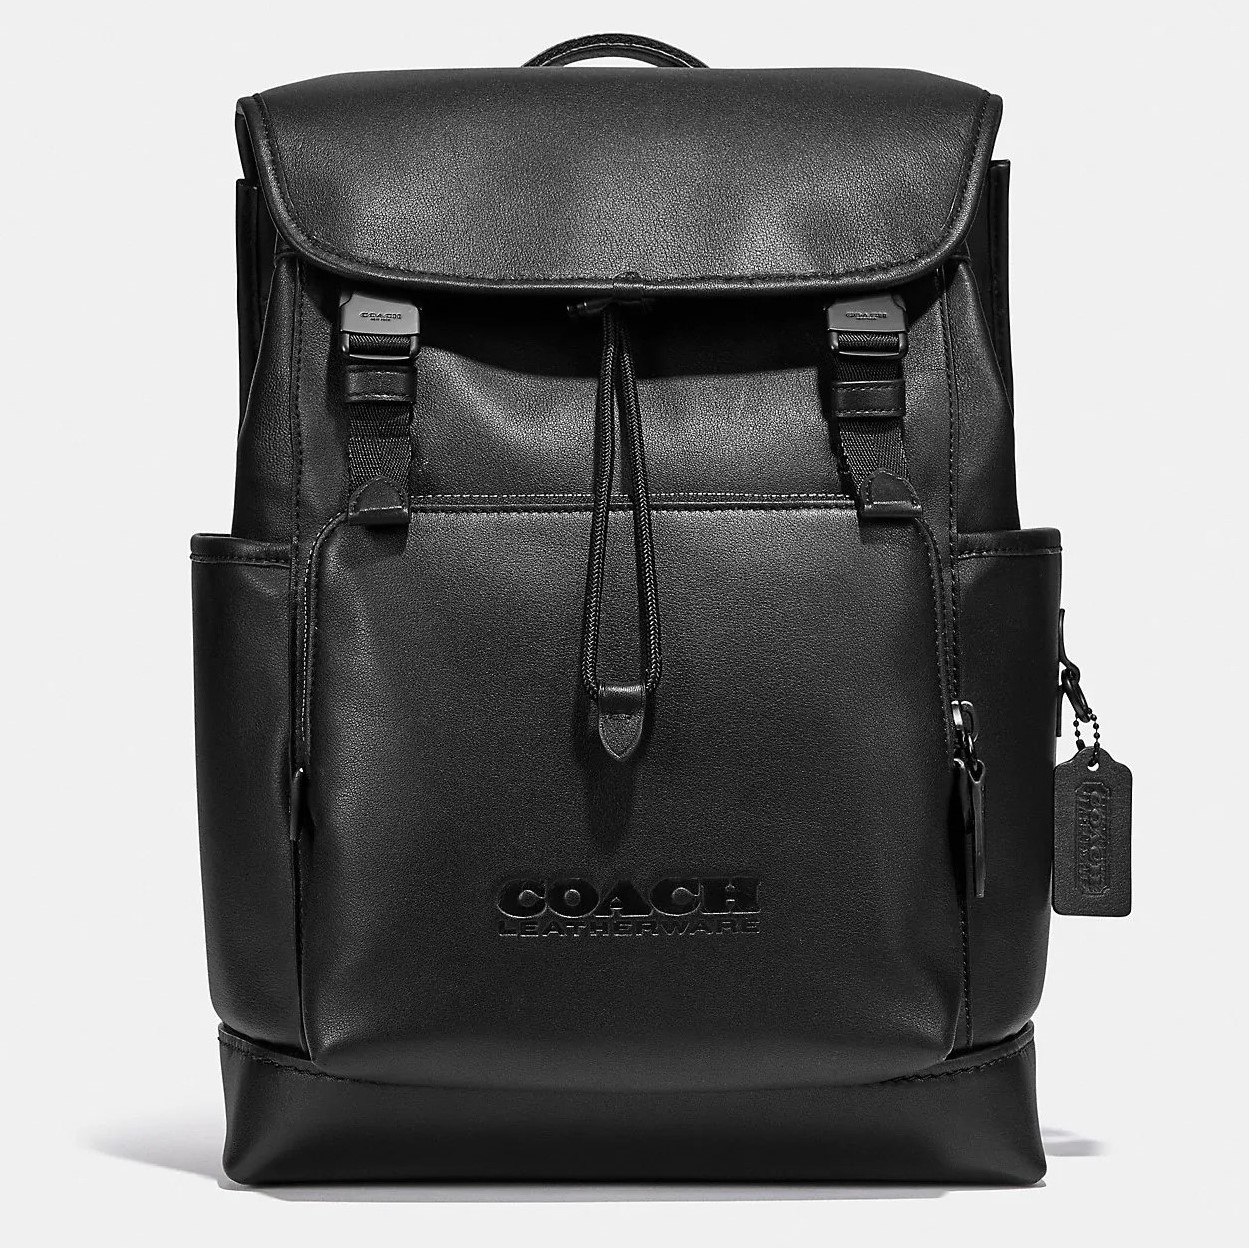 BALO NAM SIZE LỚN COACH LEAGUE FLAP REFINED CALF LEATHER BACKPACK C2284 1